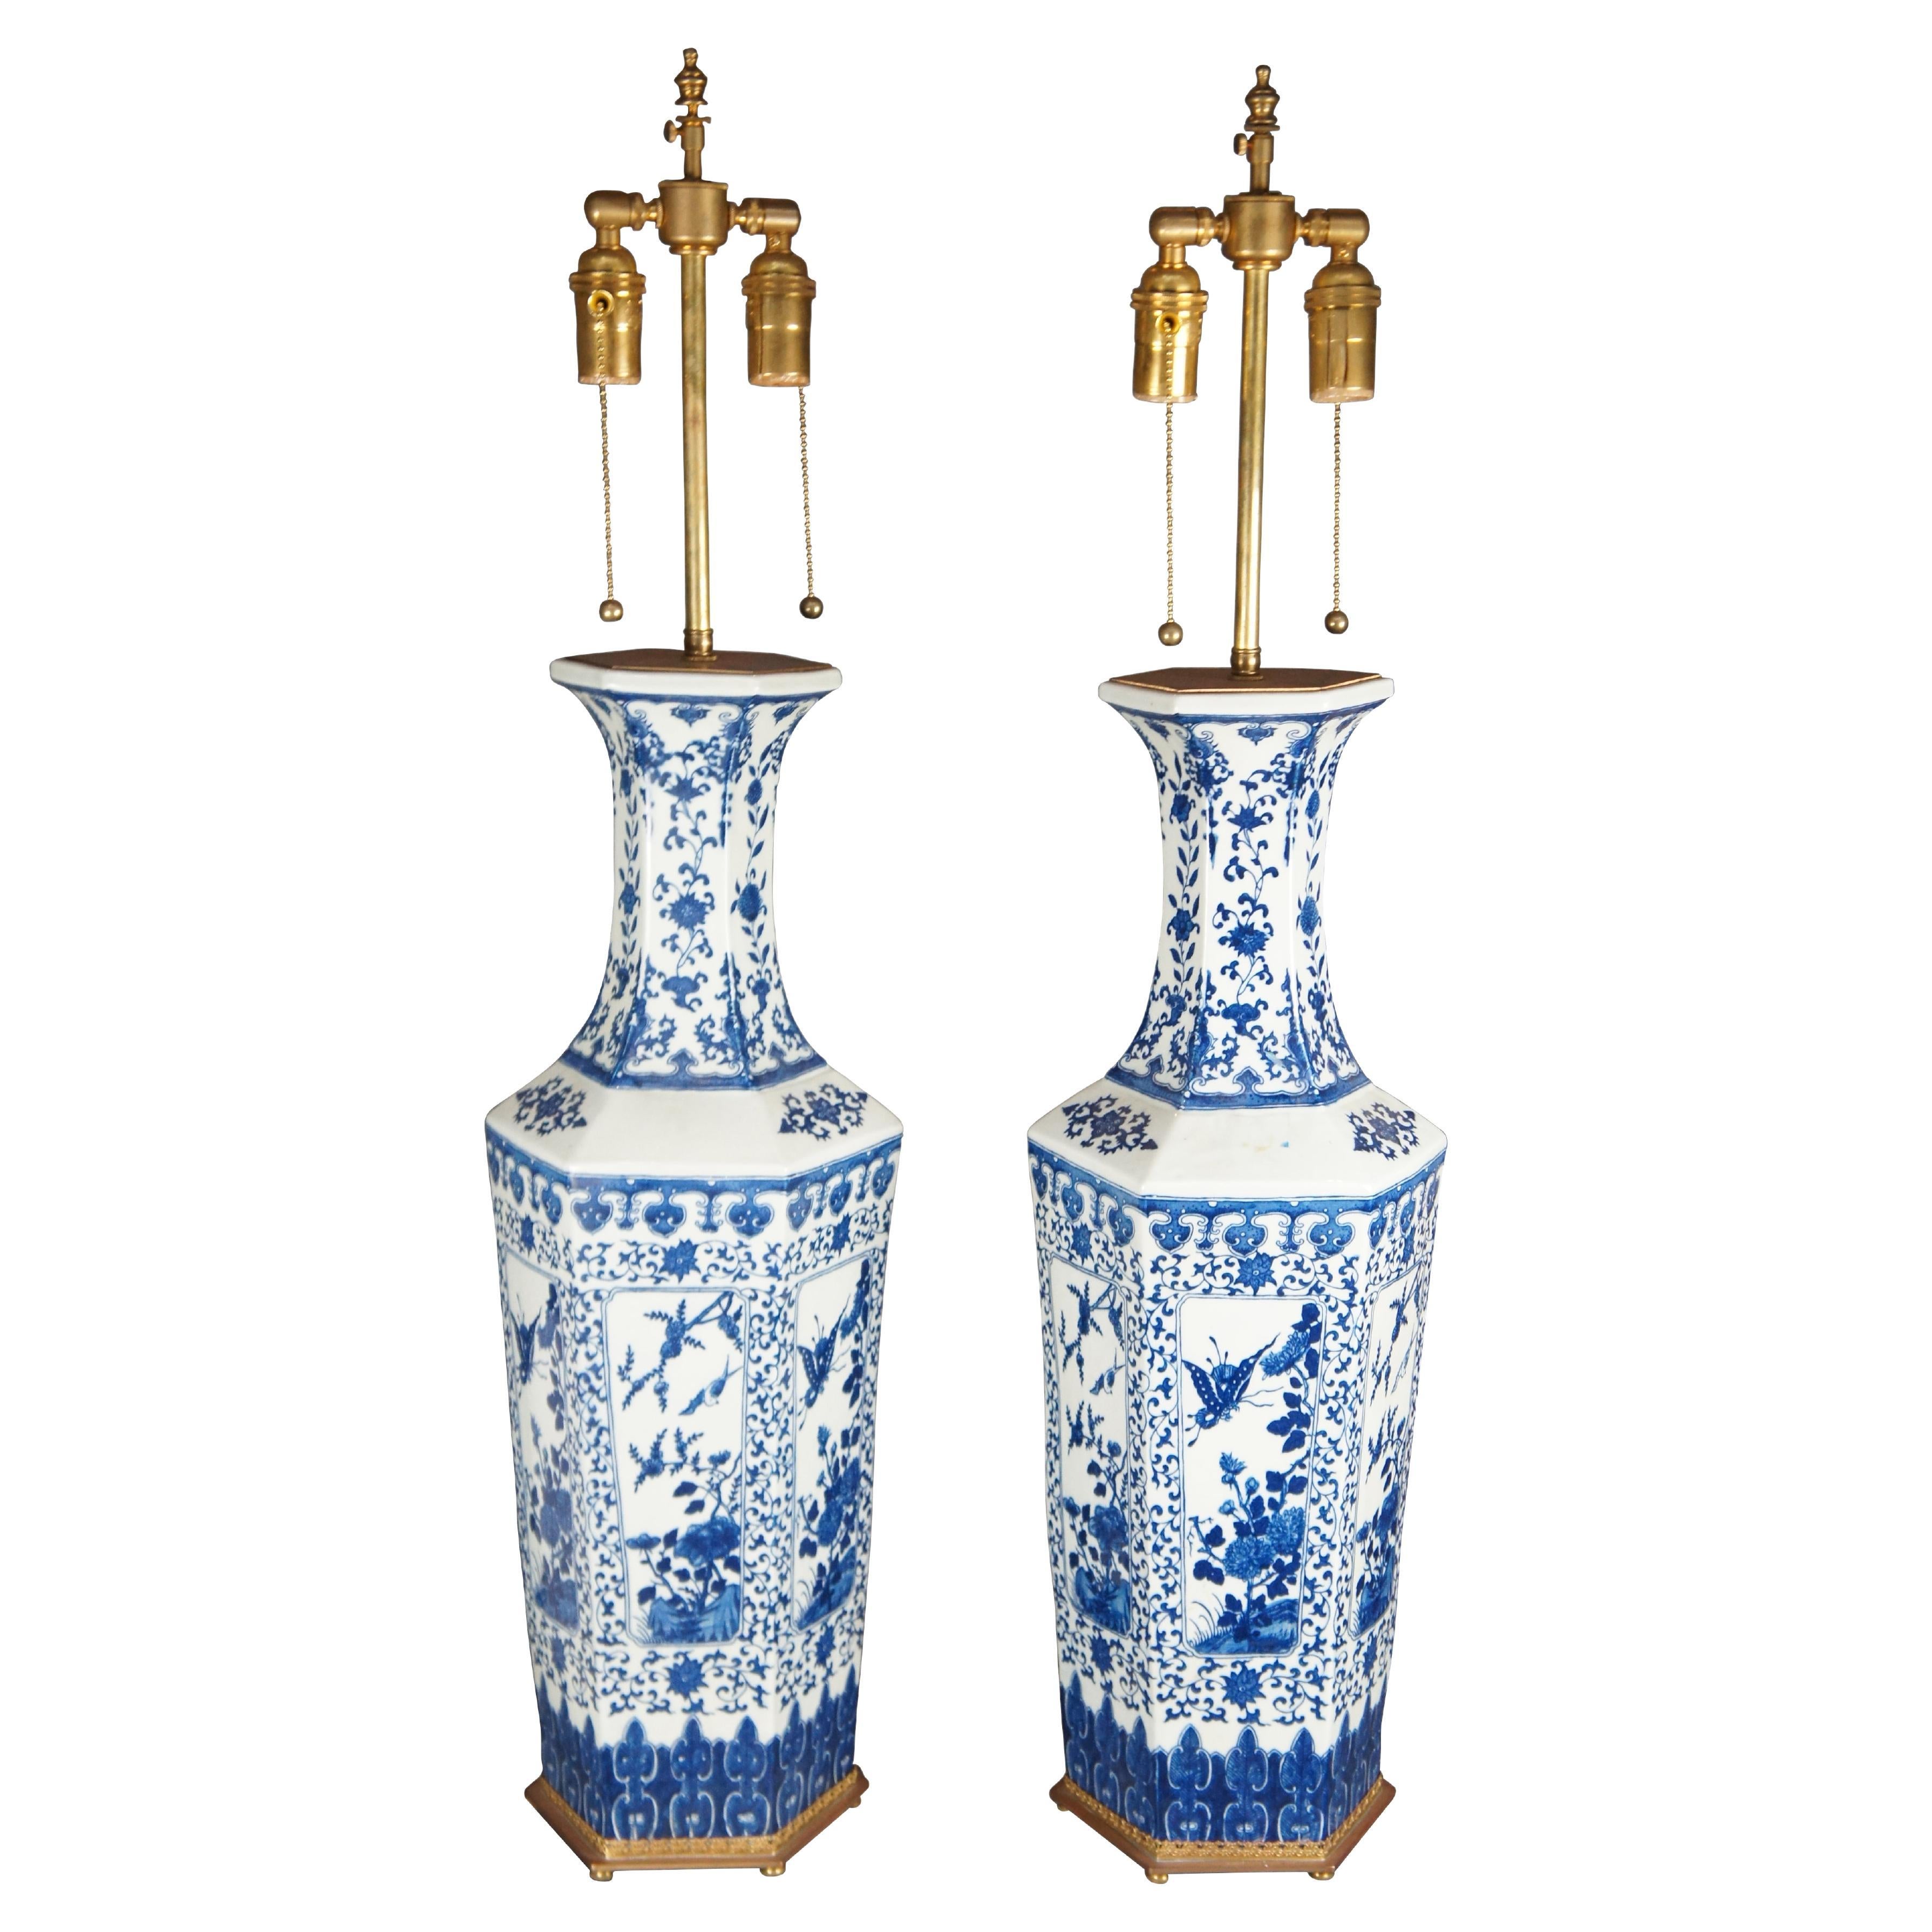 2 Chinese Blue & White Porcelain Qing Dynasty Style Hexagonal Vase Table Lamps For Sale